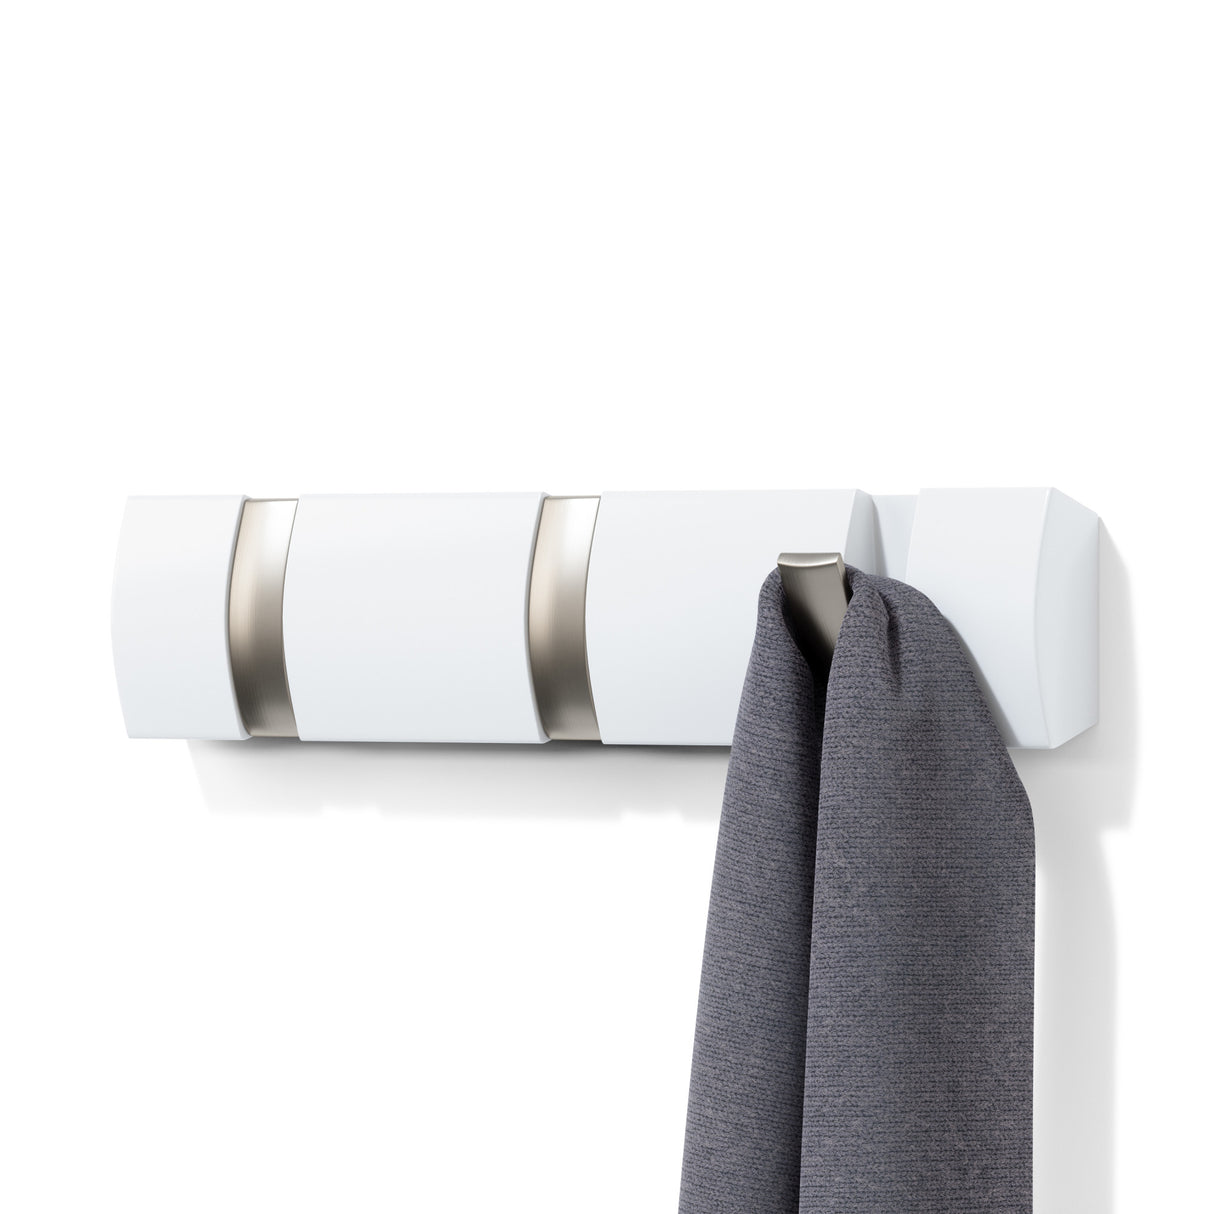 Flip 3 Wall Mounted Coat Rack - Hanging Space When You Need It